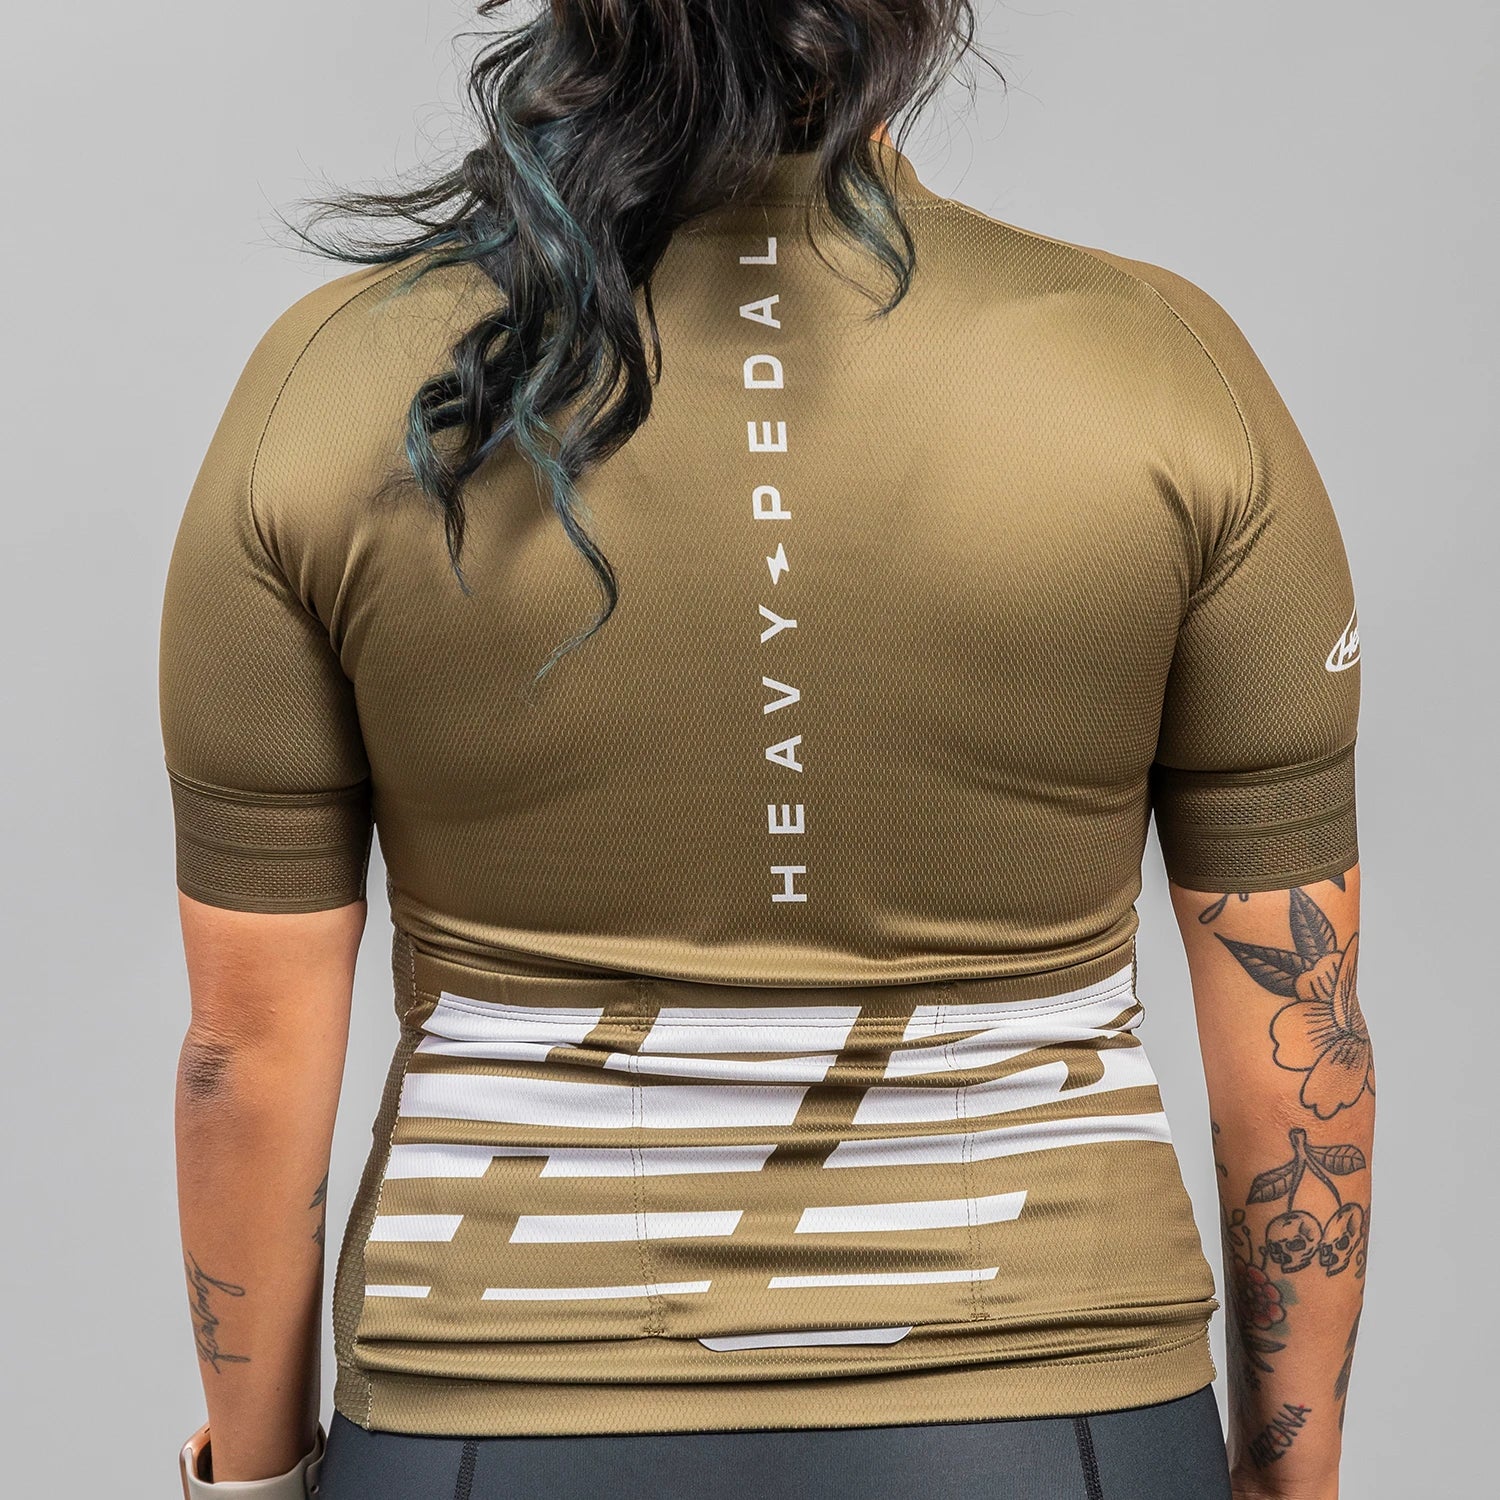 Olive Attack Women's Jersey